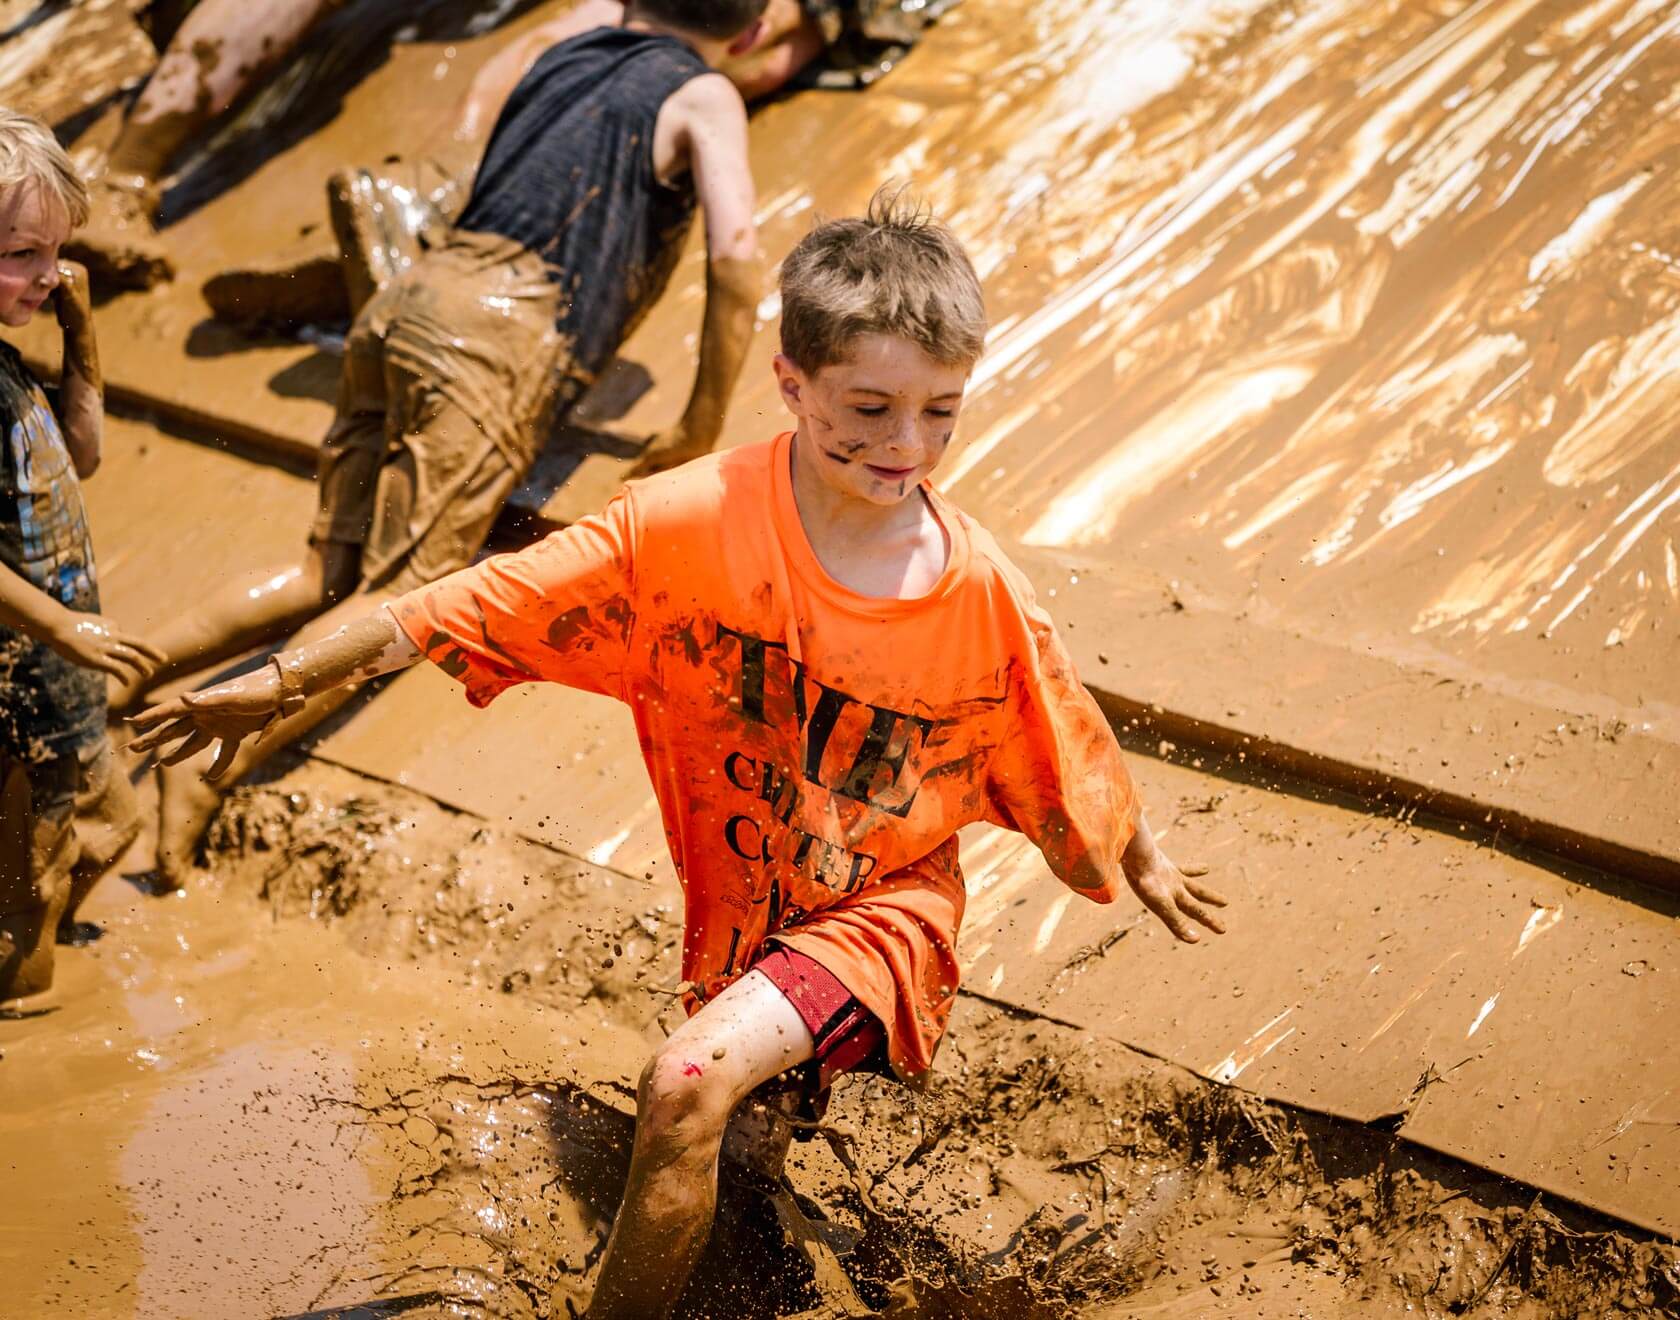 Kid participant in orange shirt walking in the mud